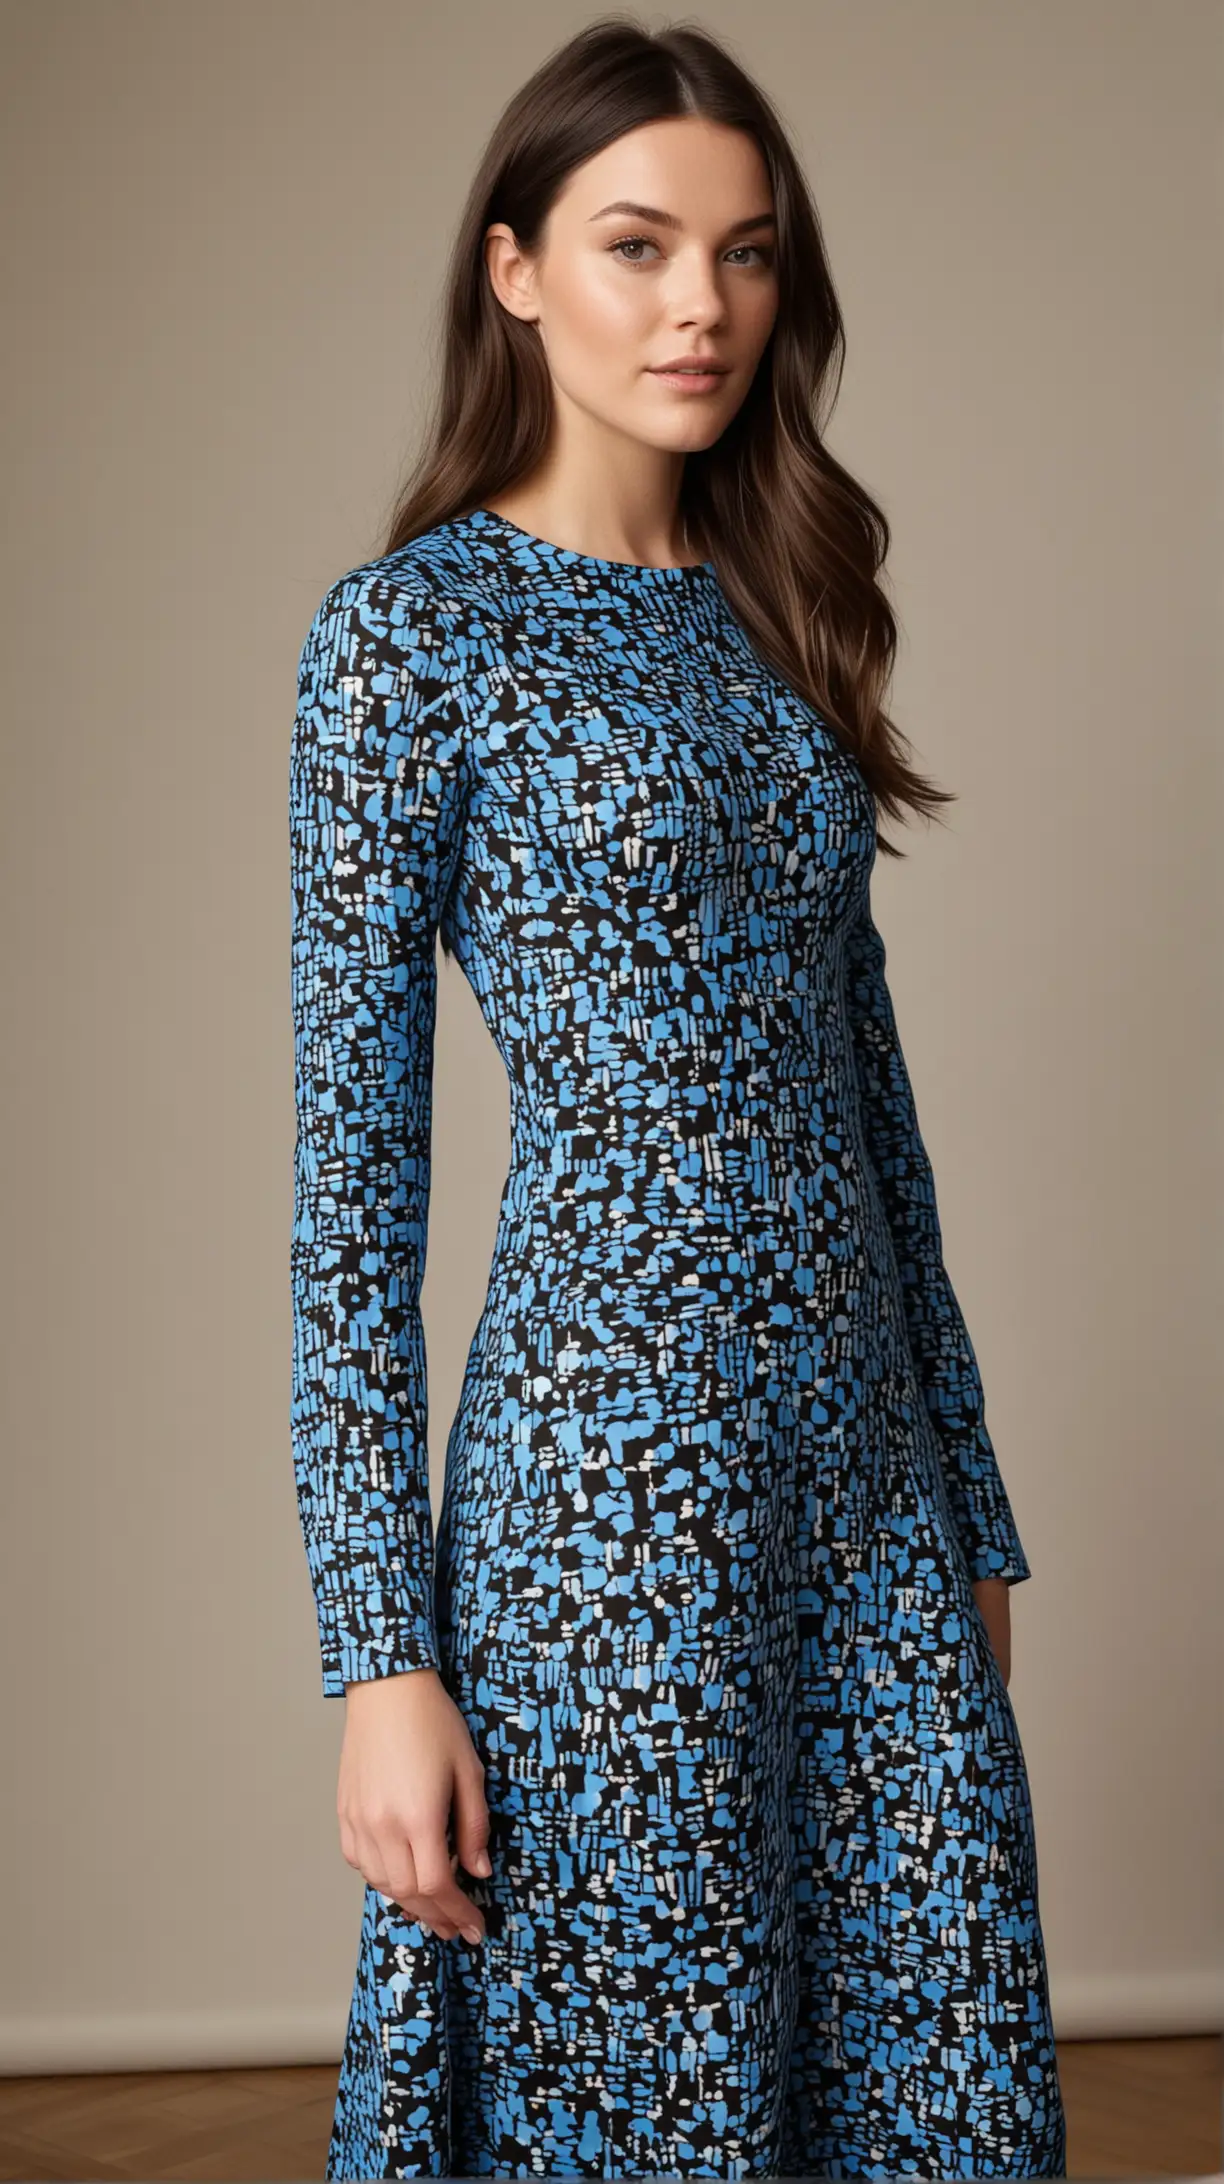 25-year-old Jordan Claire Robbins with long, dark, brunette hair wearing an Emilia Wickstead long-sleeve blue and black-patterned, mid-length gown